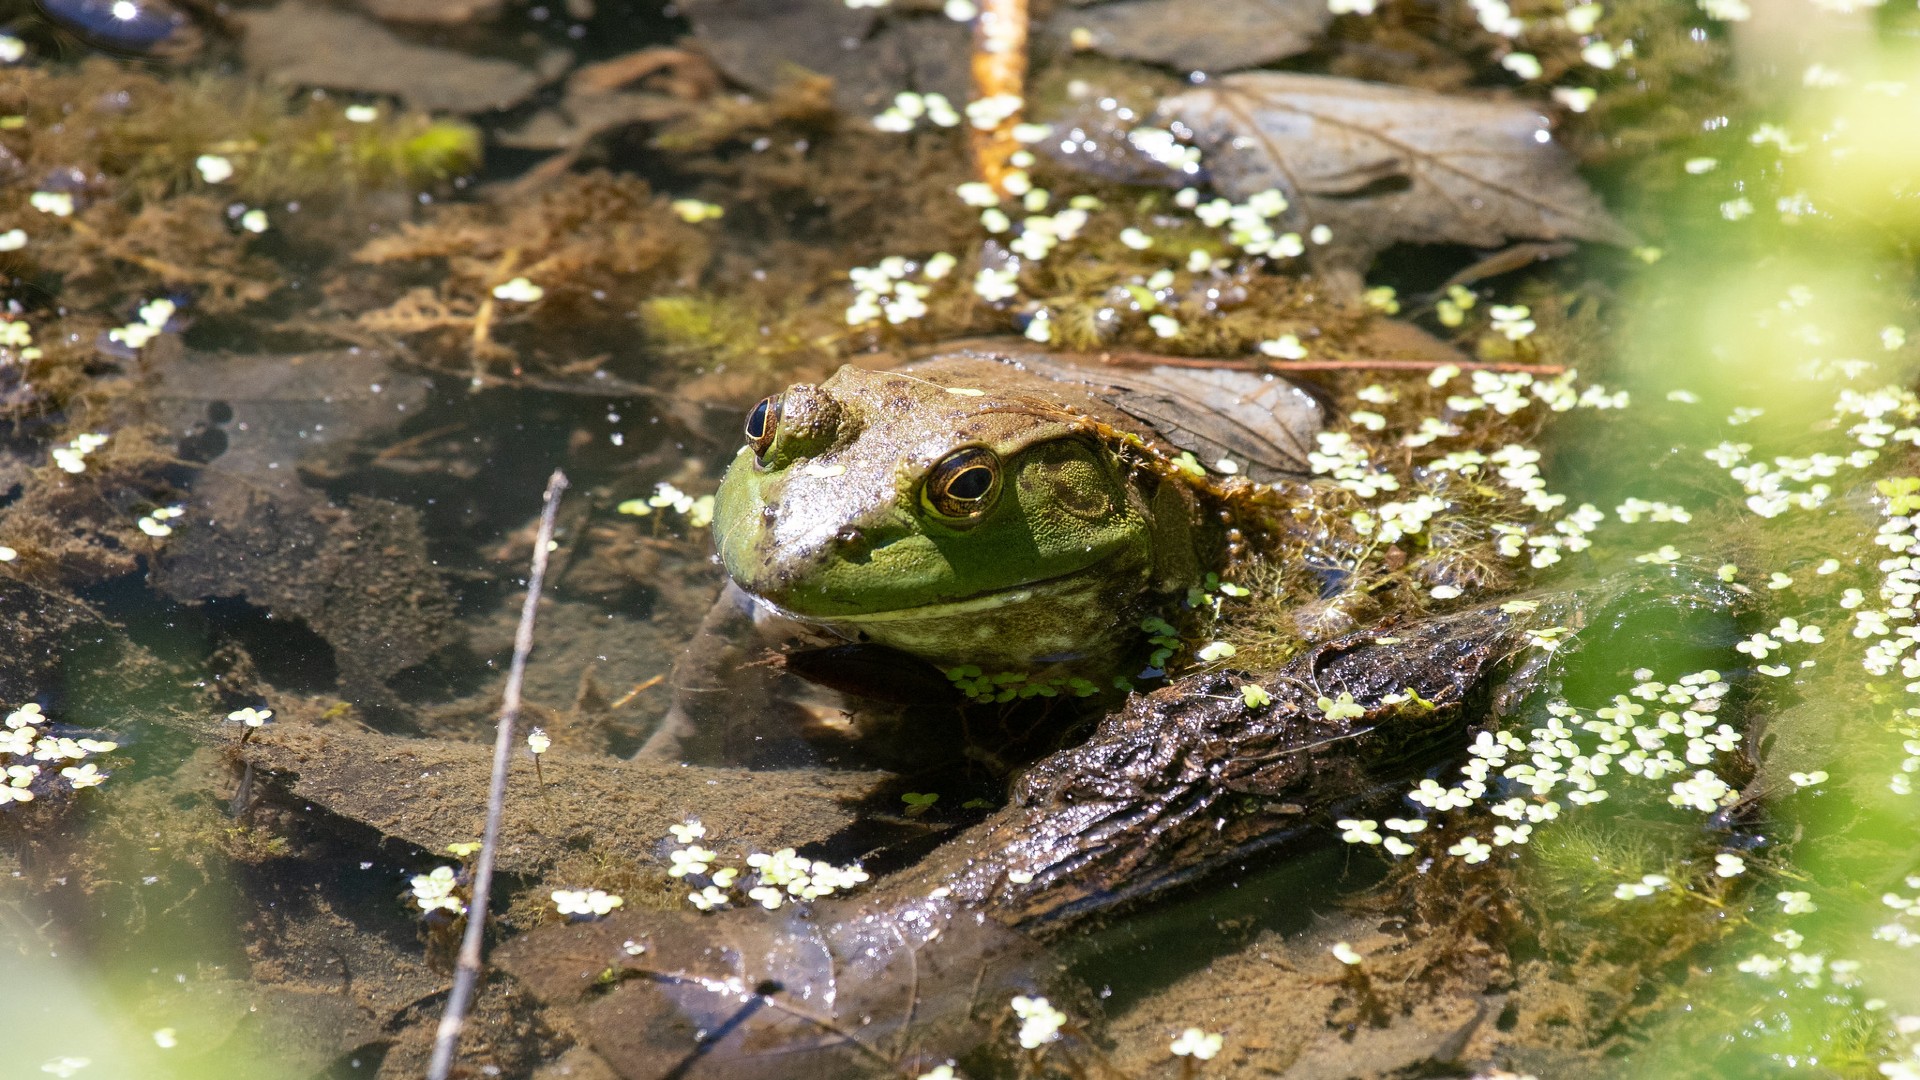 A bullfrog sits in a pond covered by some tree blossoms